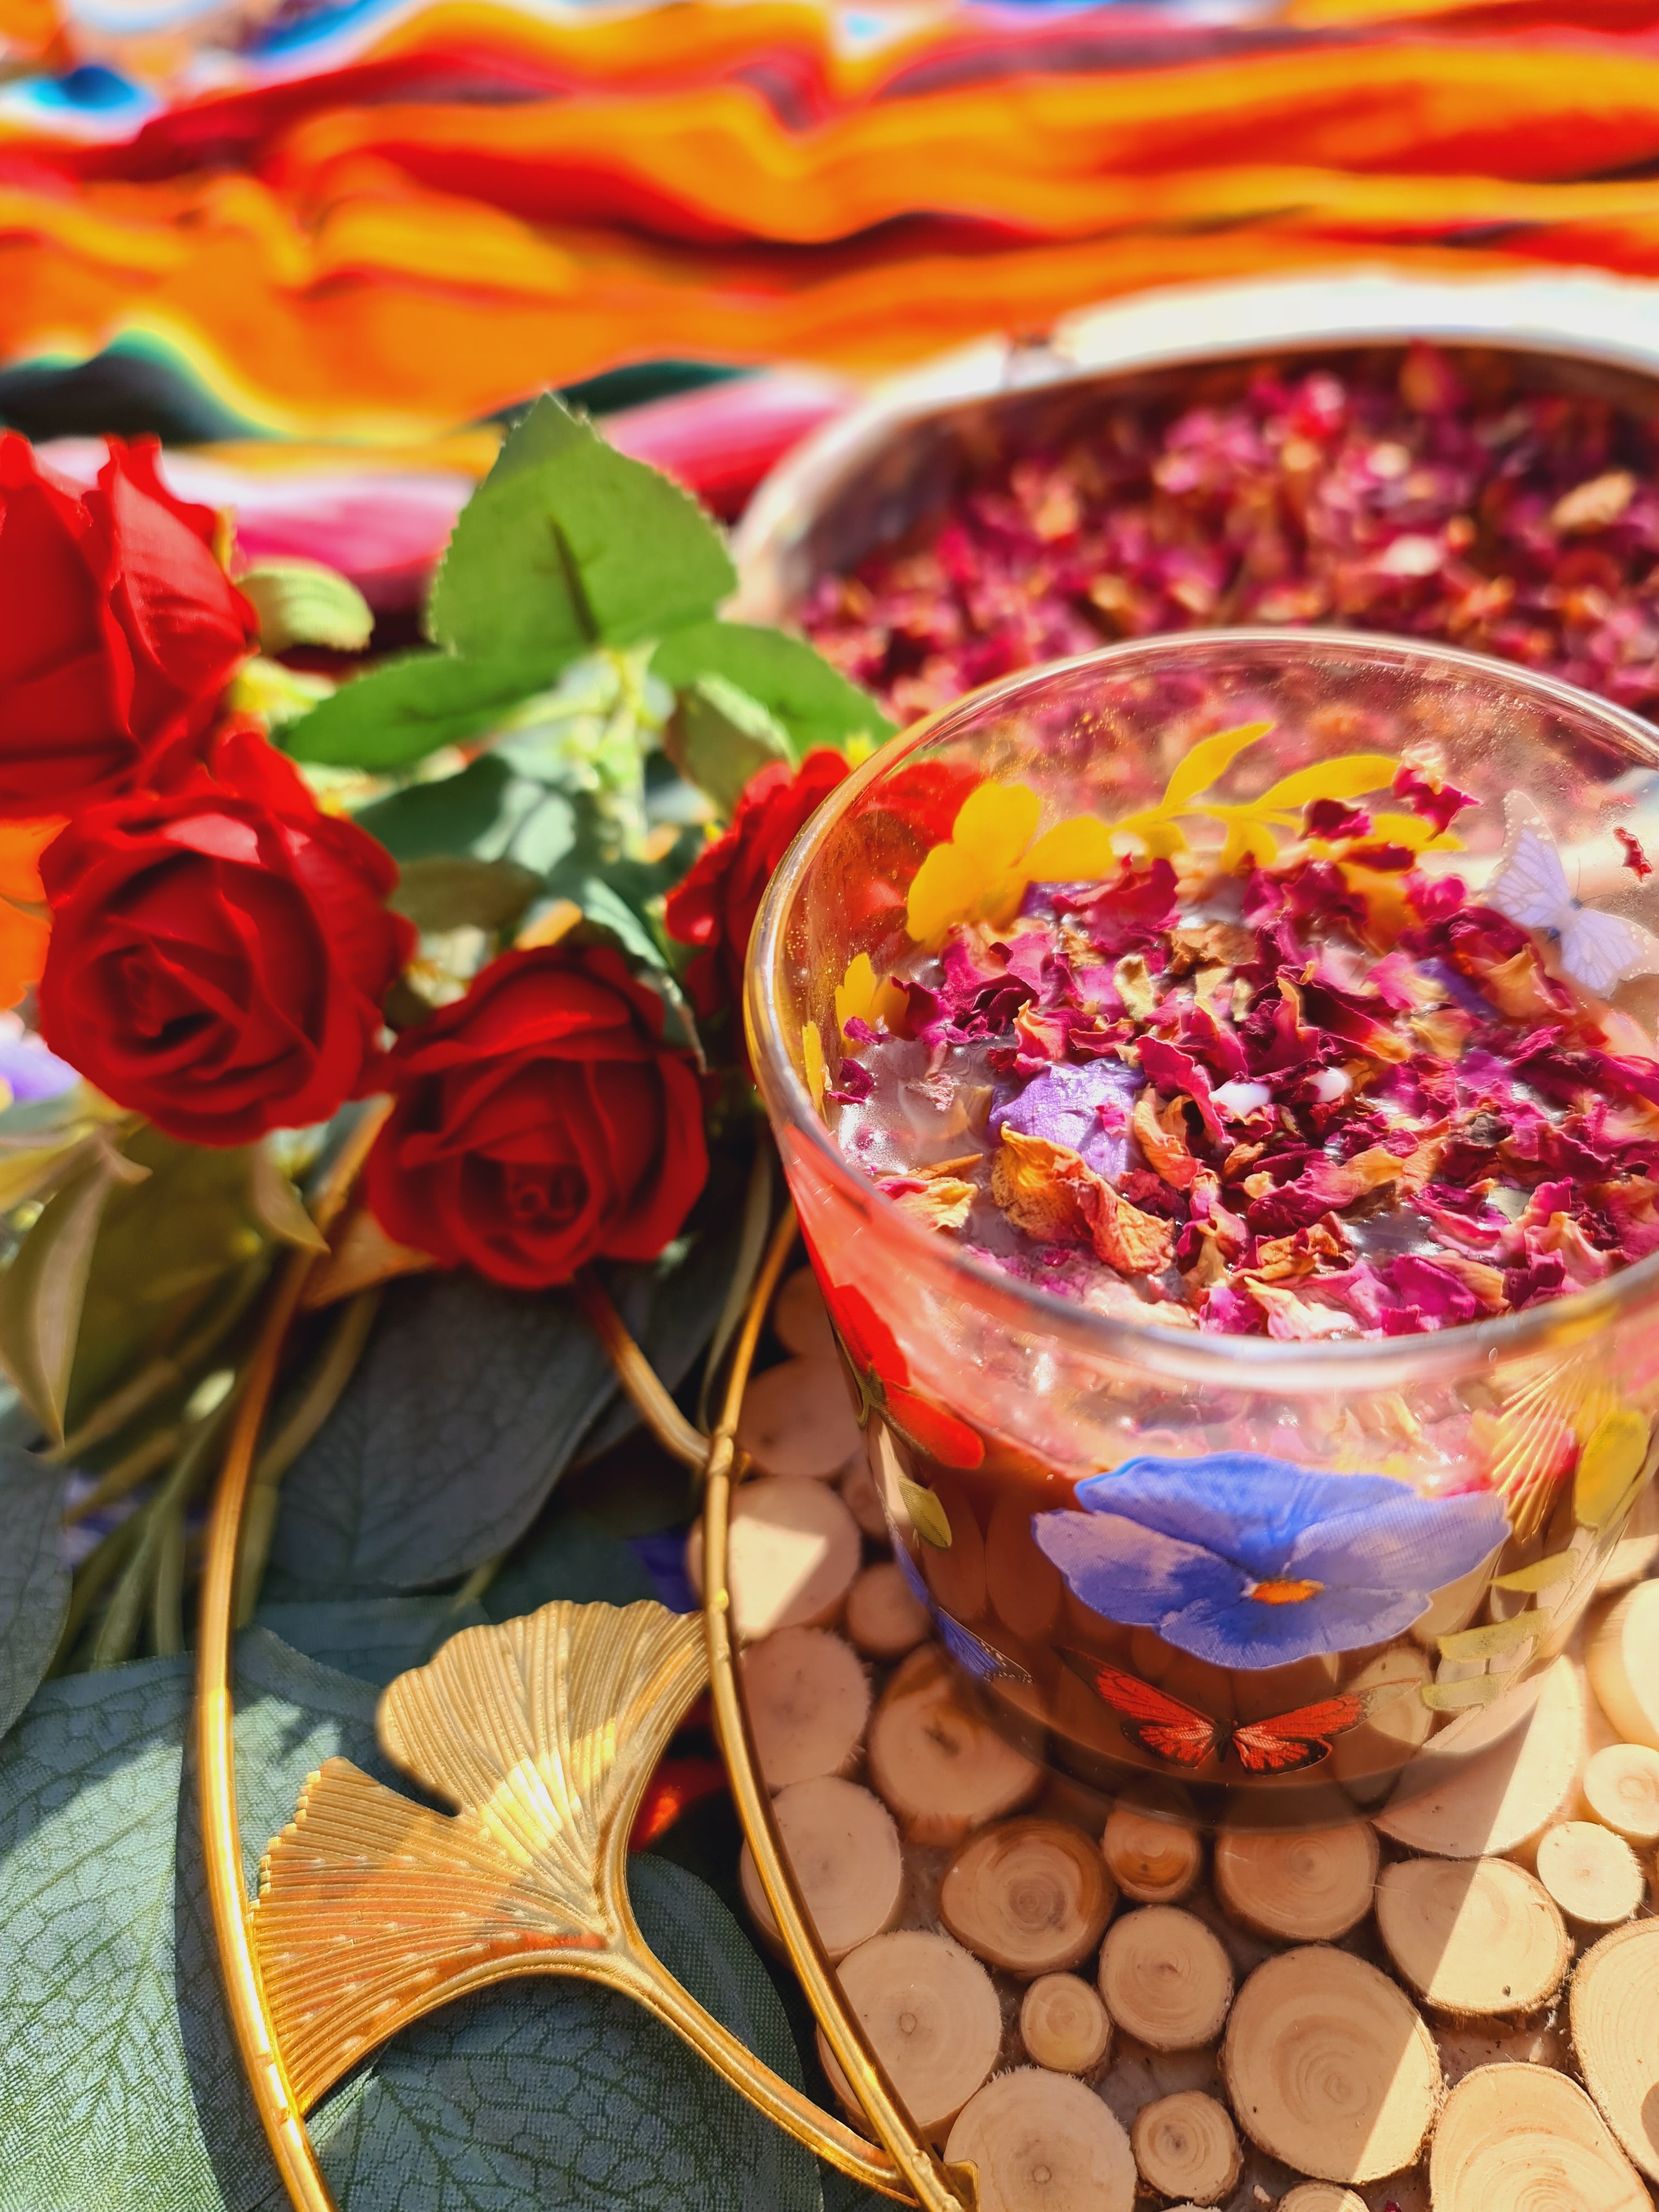 An exquisite image of a blue lotus and rose petal cacao drink, served in a charming floral glass, garnished with edible dried rose petals. A picturesque abalone shell filled with rose petals and fresh roses in the background adds to the visual delight and elegance..